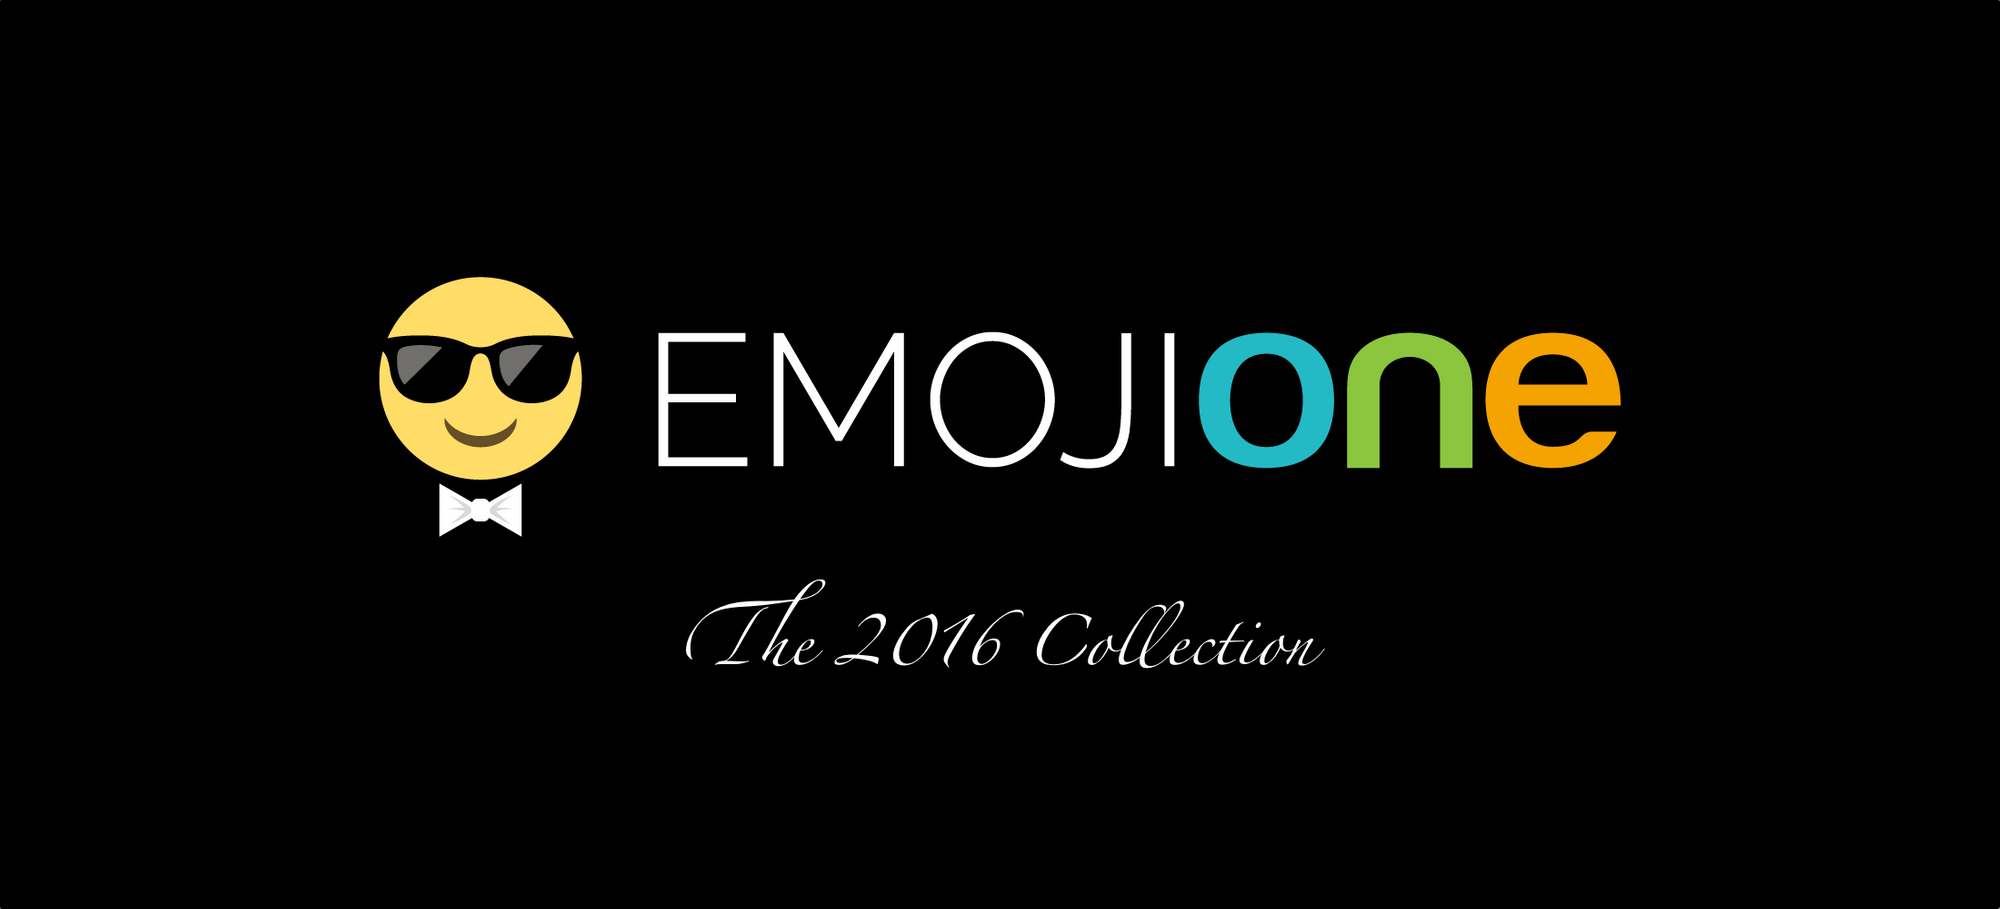 Emoji One Launches 2016 Collection